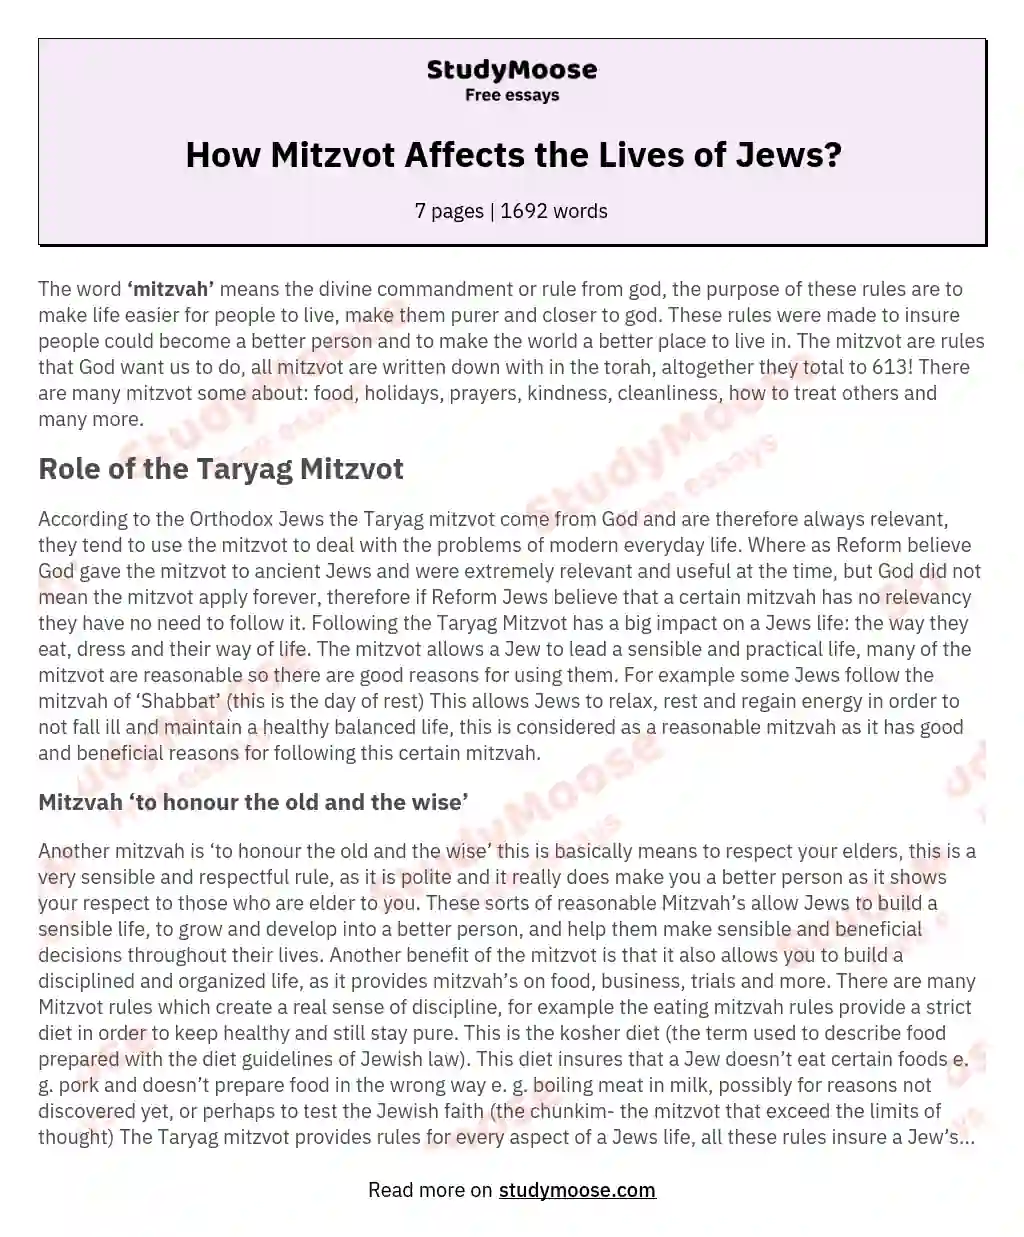 How Mitzvot Affects the Lives of Jews? essay